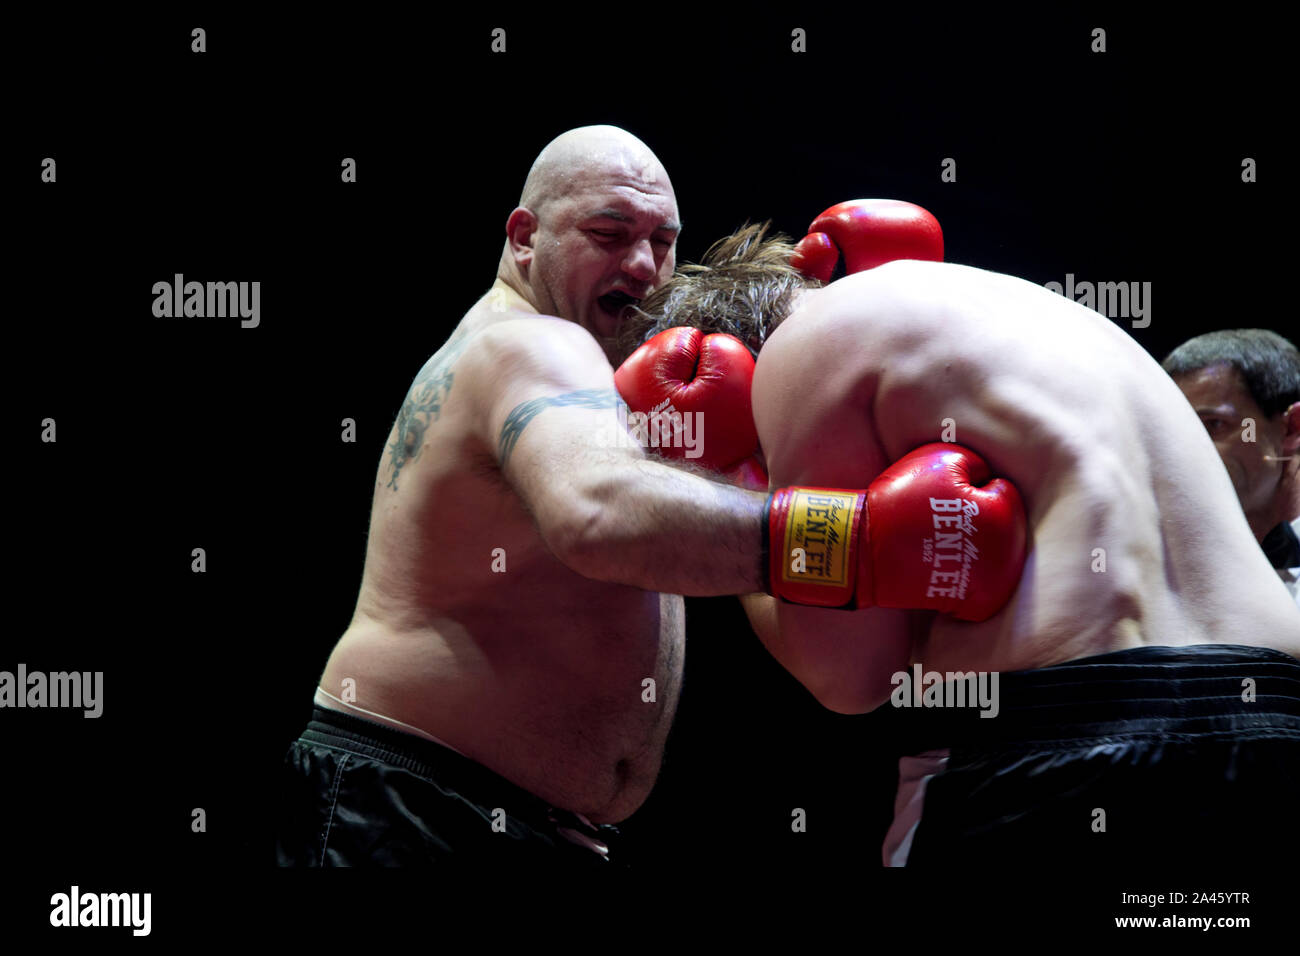 Moscow, Russia. 28th of November, 2013 Italian boxer Gianluca Sirci in a match against Russian athlete Nikolai Sazhin at the World Chess Boxing Championship in Moscow, Russia Stock Photo